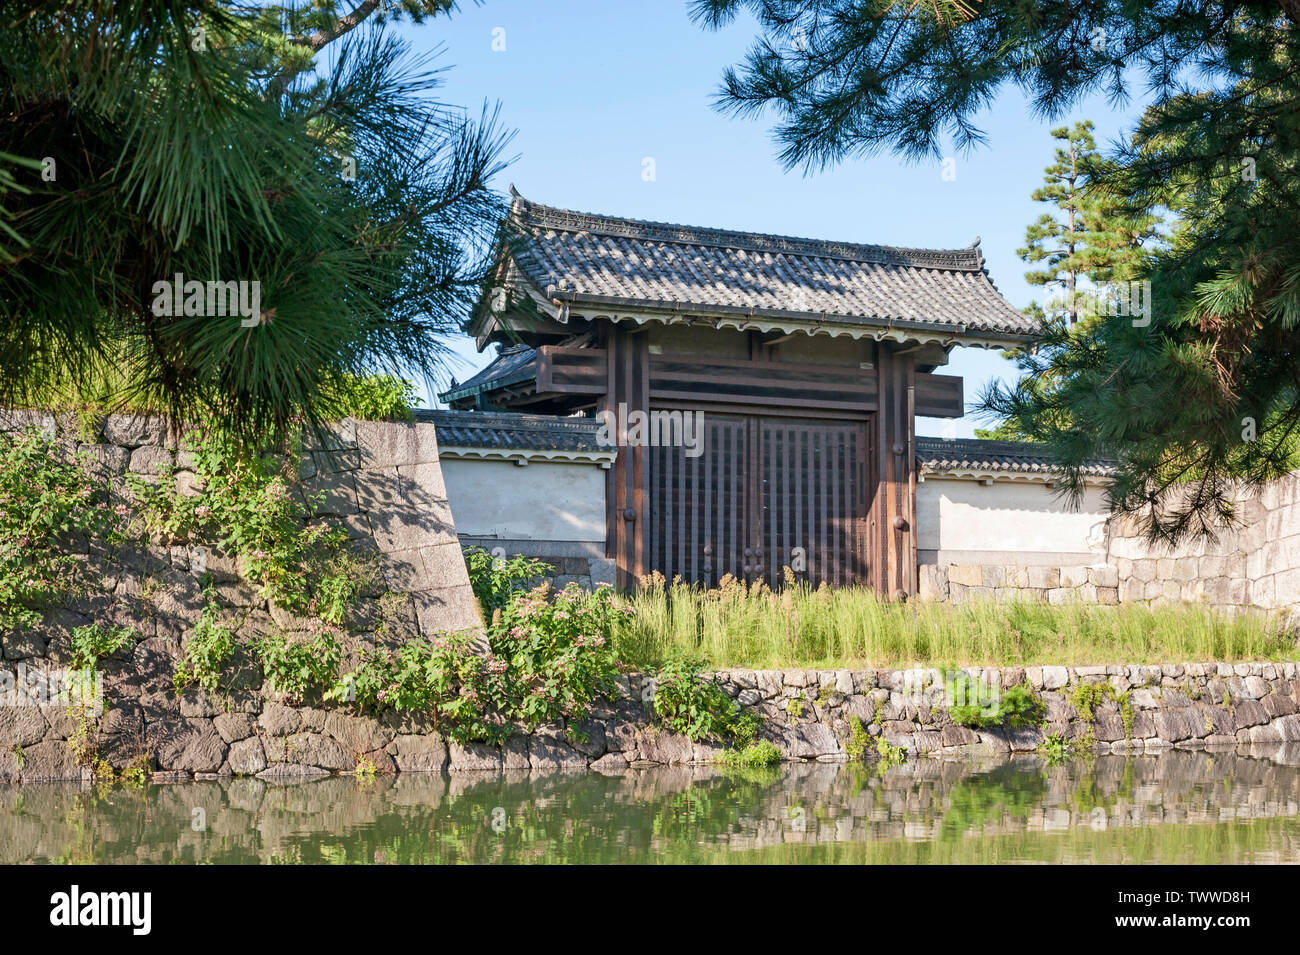 Wooden west gate (Nishi-mon) opening above stone wall onto moat from the grounds of Nijo castle complex, Kyoto, Japan. Stock Photo